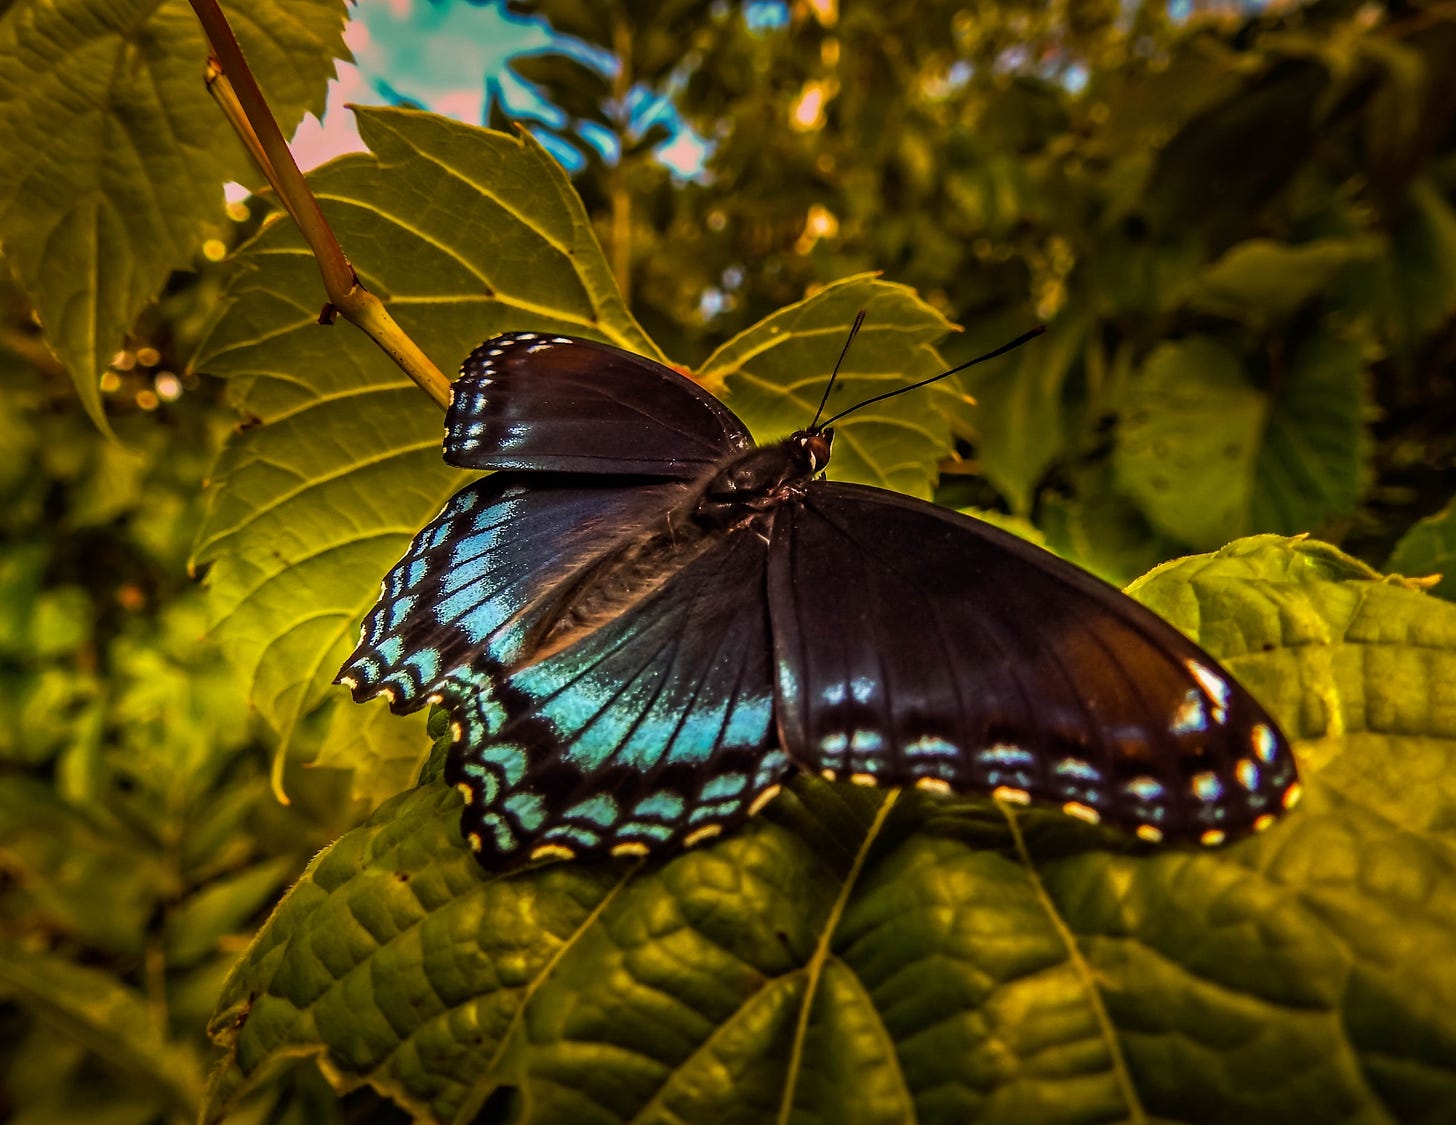 A colorful Butterfly in nature's beauty and harmony